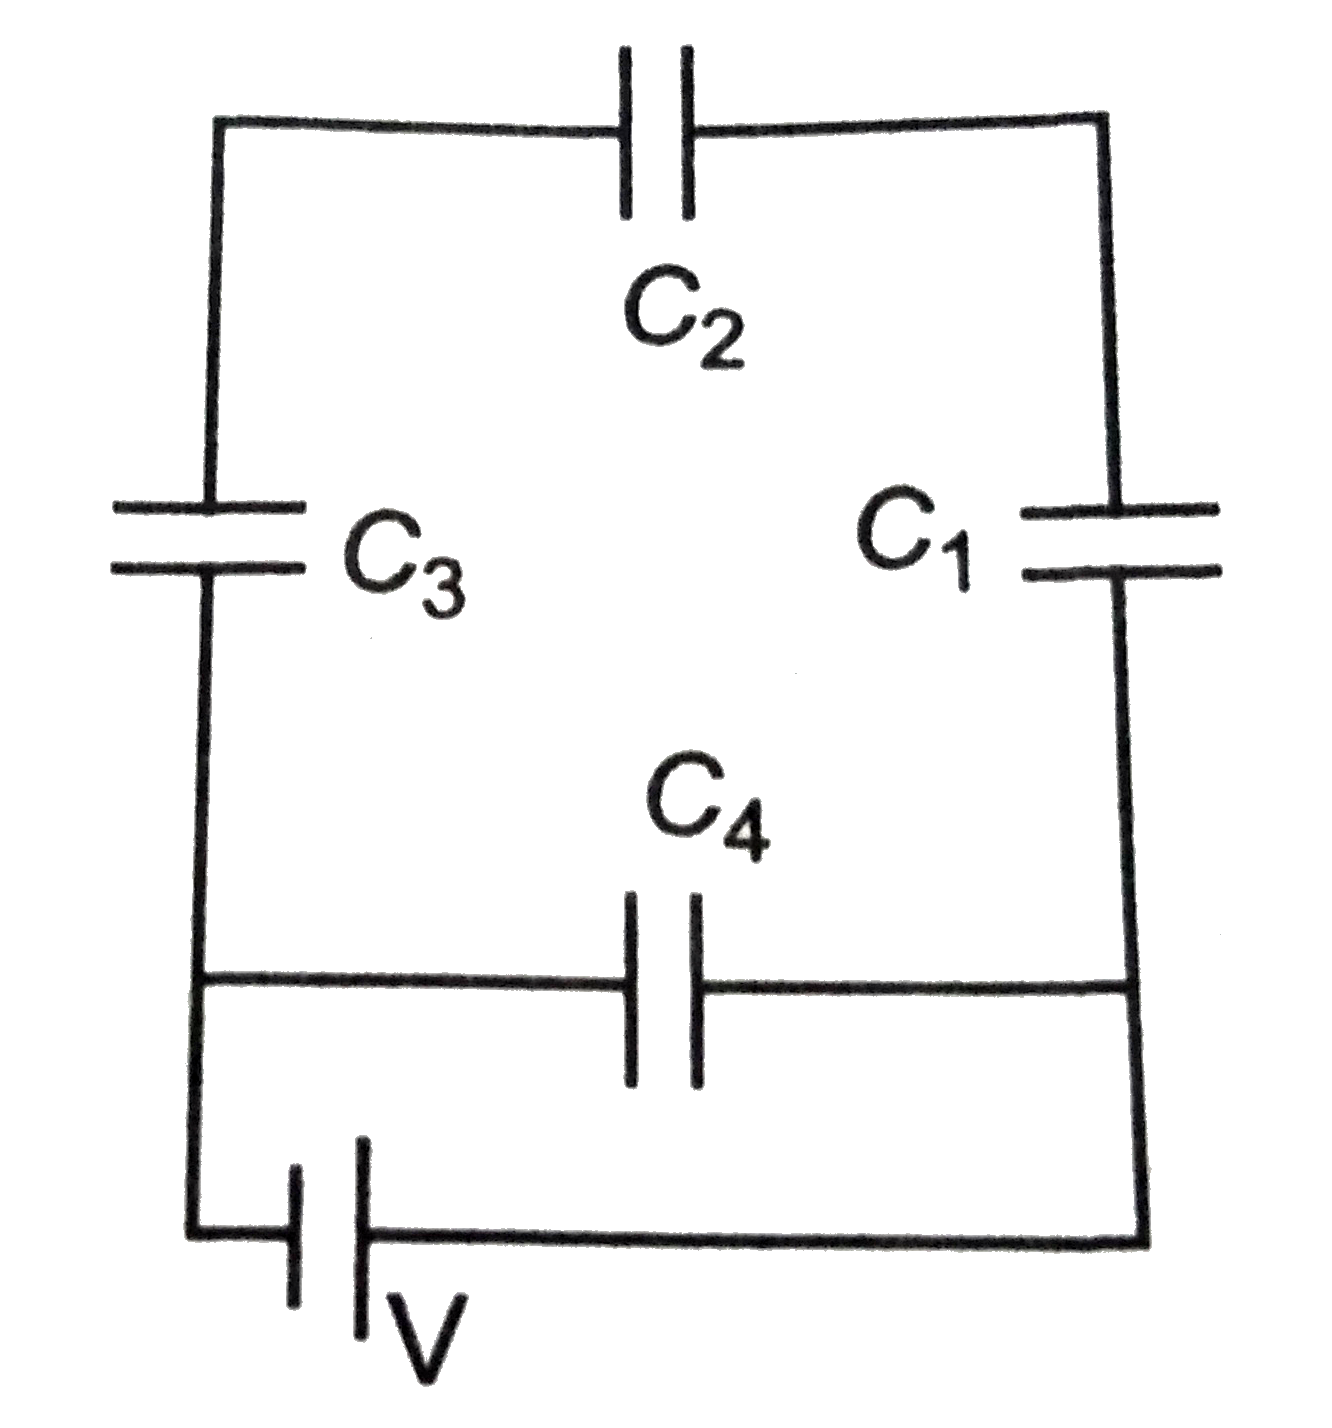 A network of four capacitors of capacities equal to C(1)=C,C(2)=2C, C(2)=3C and C(4)=4C  are connected to a battery as shown in the figure.      The ratio of the charges C(2) and C(4) is